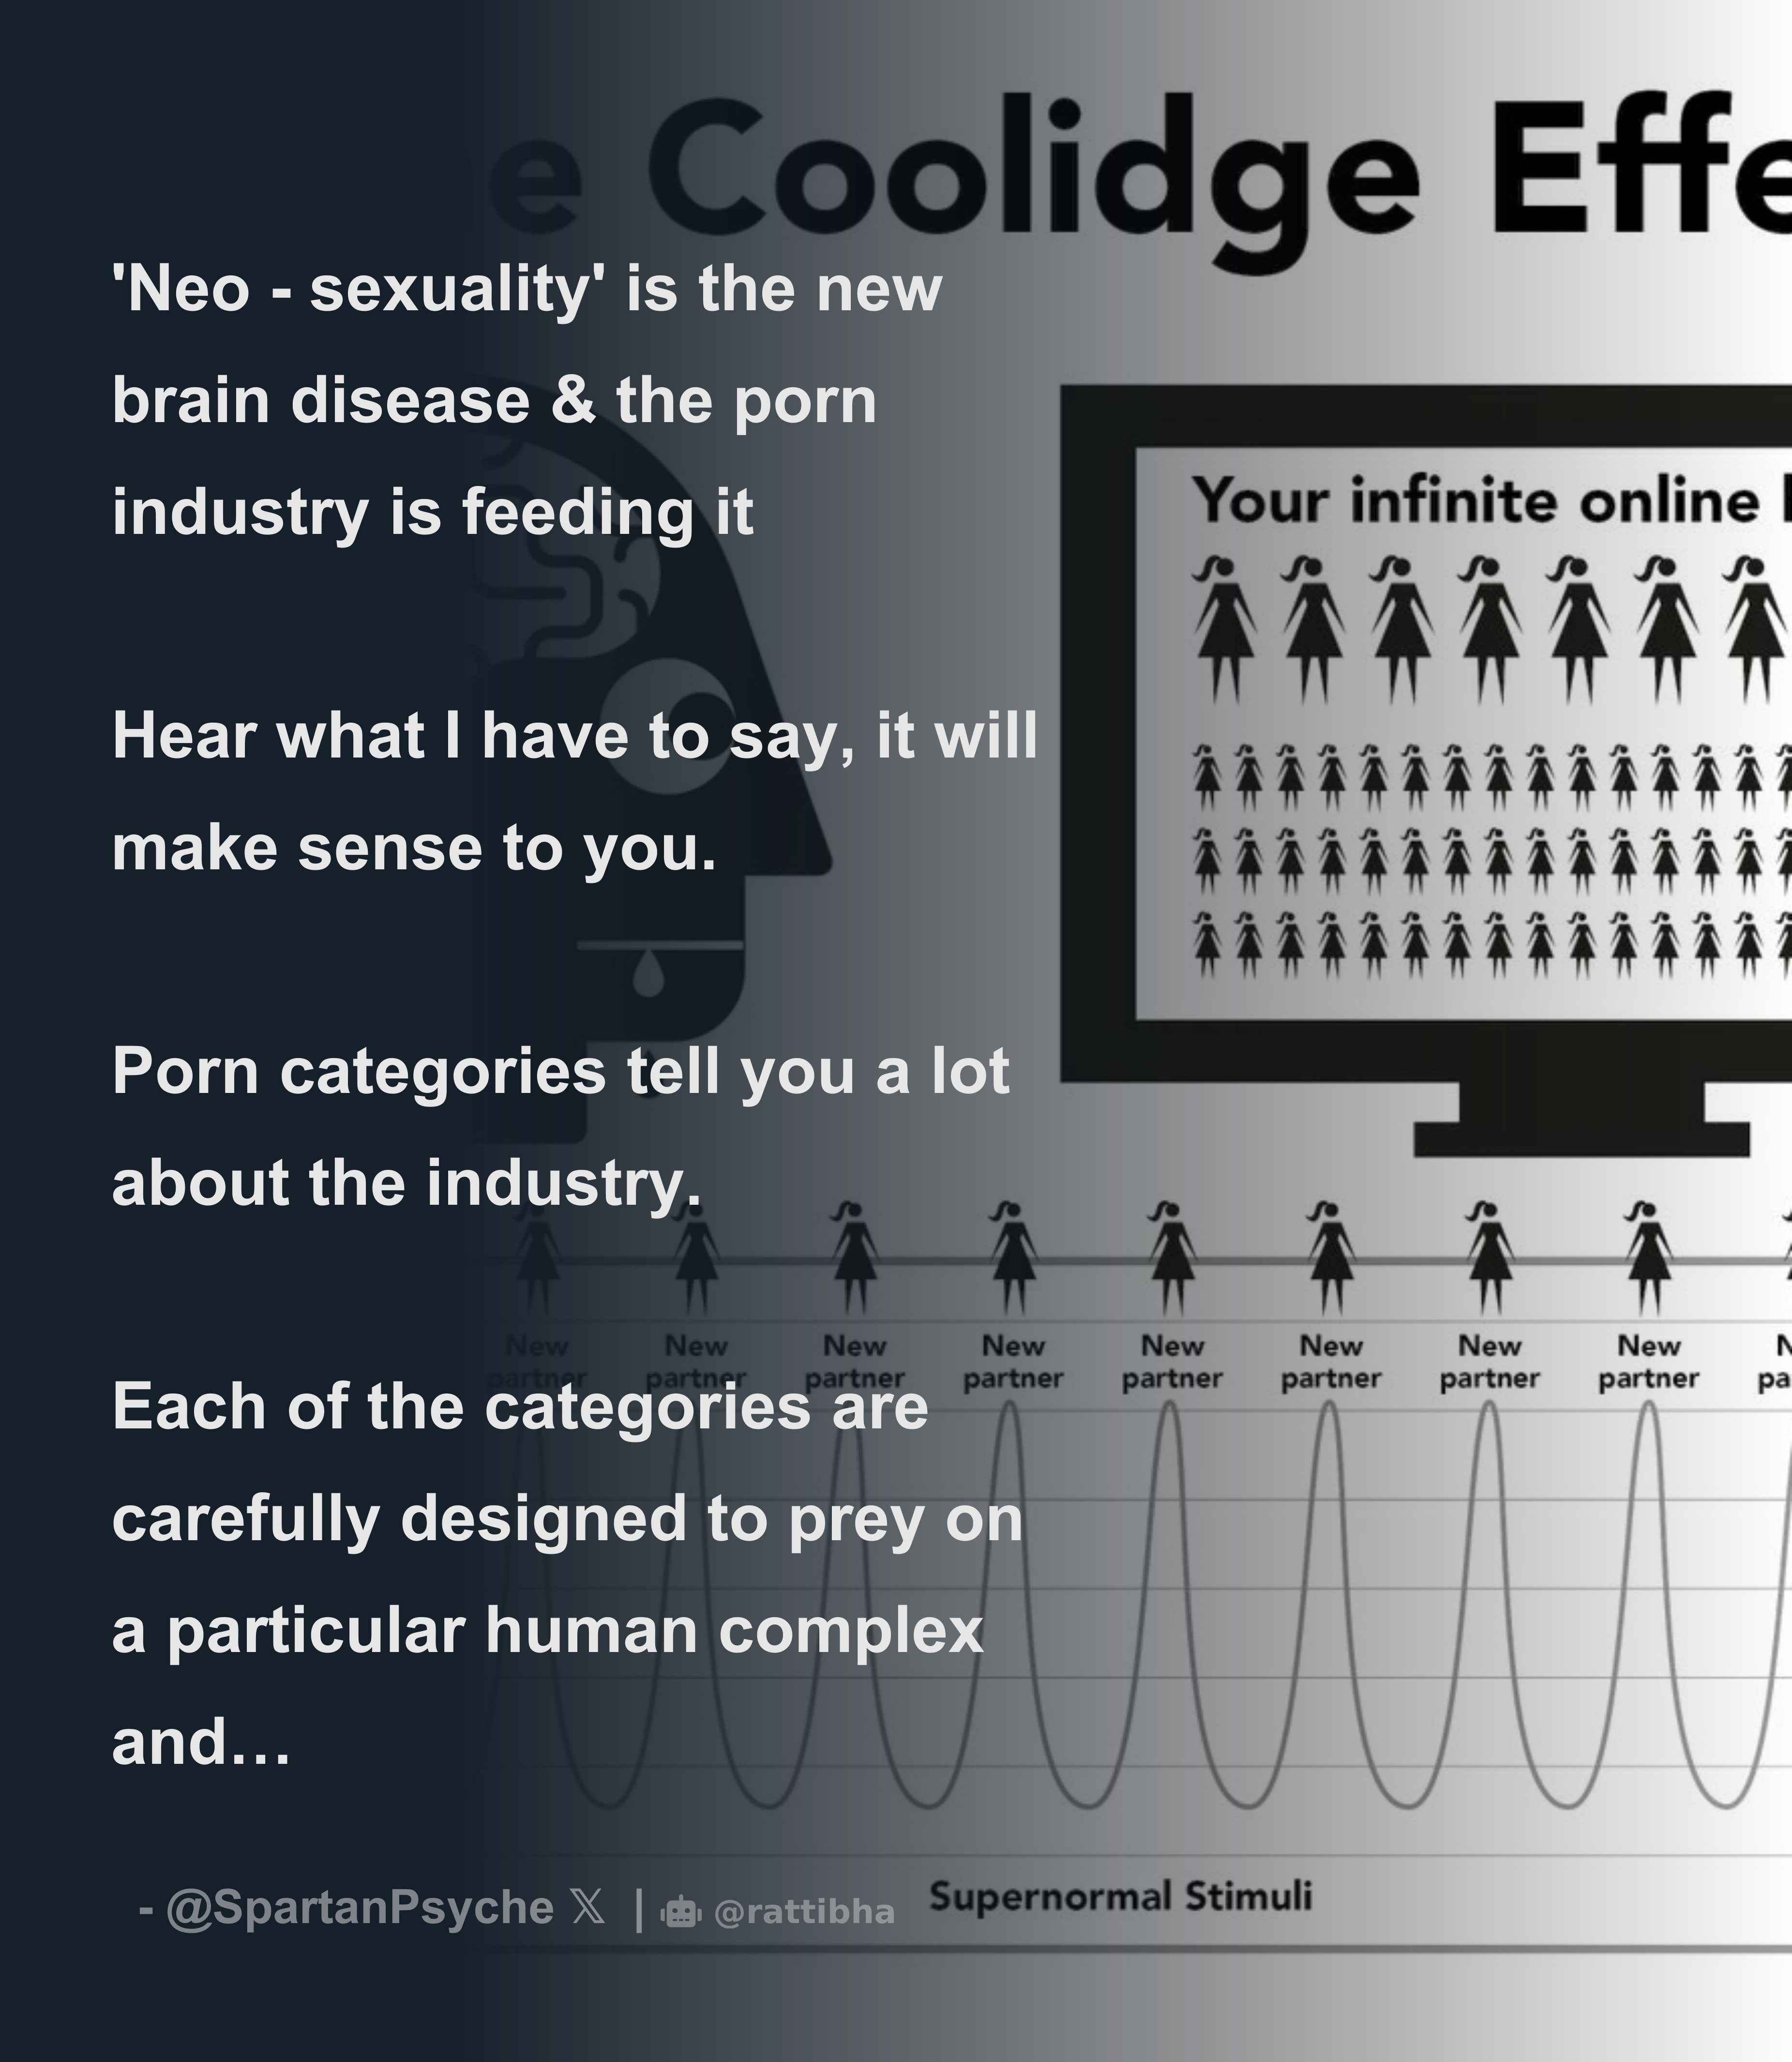 Neo - sexuality' is the new brain disease & the porn industry is  feeding it Hear what I have to say, it will make sense to you. Porn categ -  Thread from